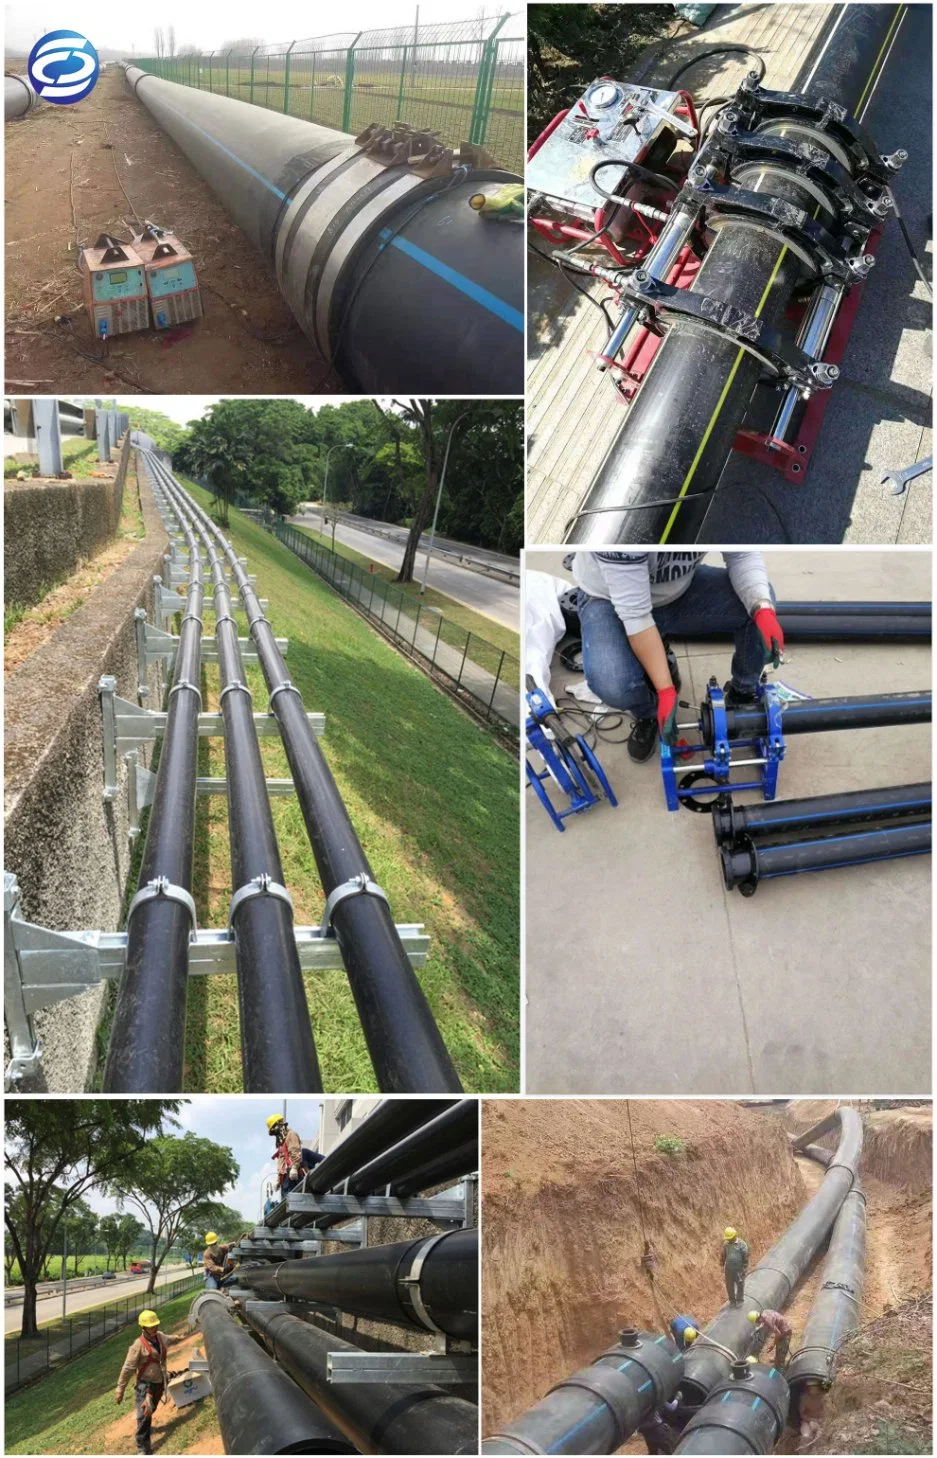 HDPE Pipe for Potable Water Factory Price Polyethylene Black PE Pipe